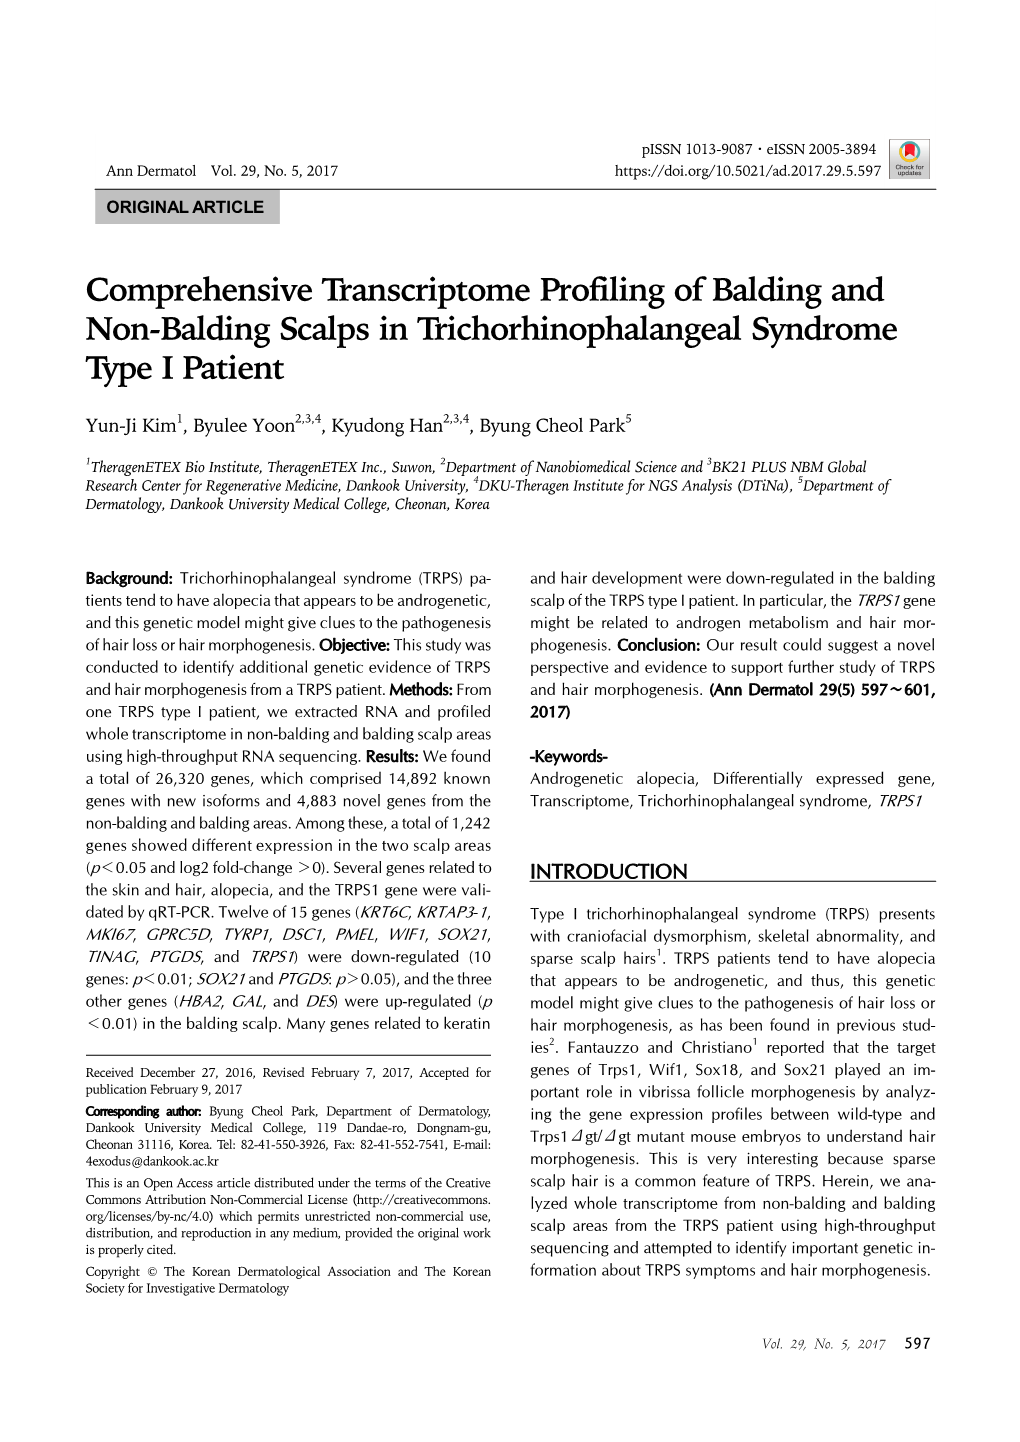 Comprehensive Transcriptome Profiling of Balding and Non-Balding Scalps in Trichorhinophalangeal Syndrome Ty P E I Pa T I E N T